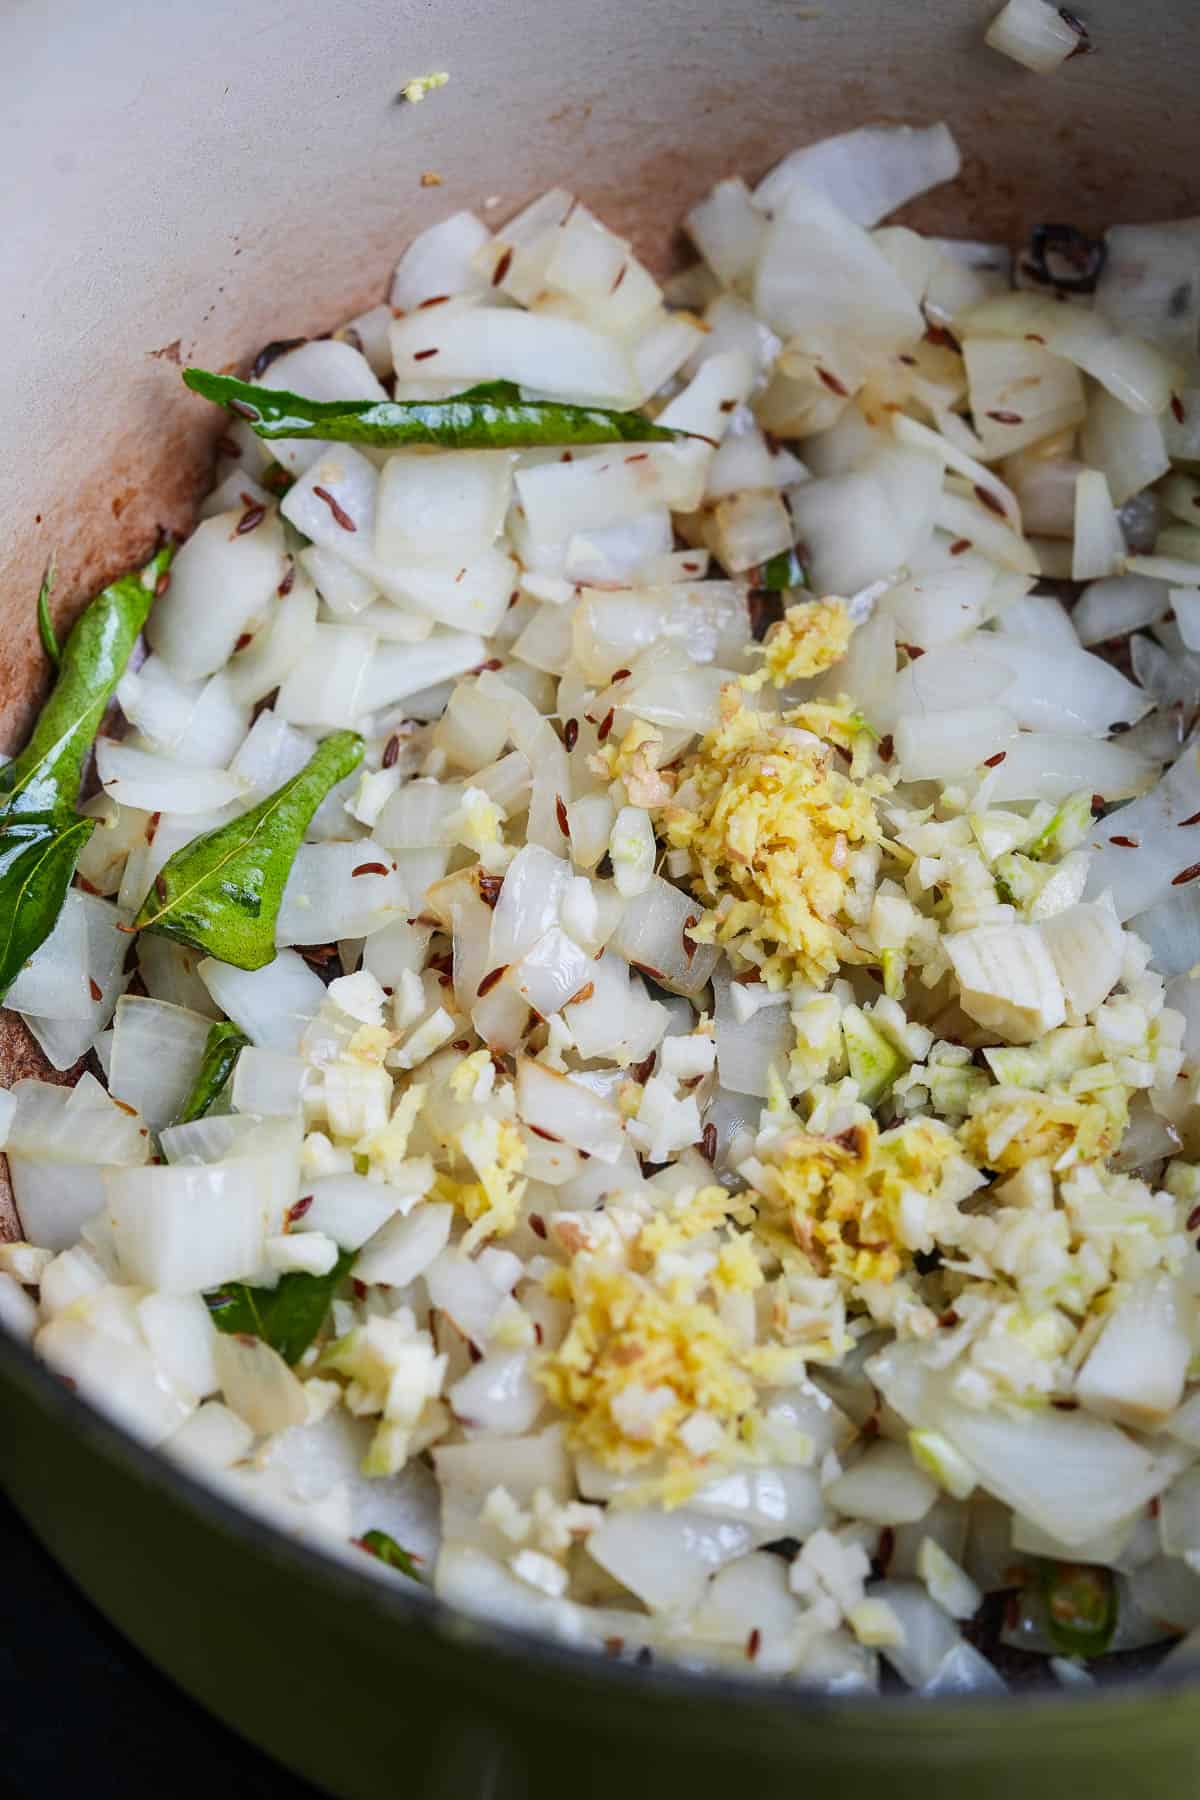 A pan filled with onions, cumin seeds, curry leaves, and ginger.